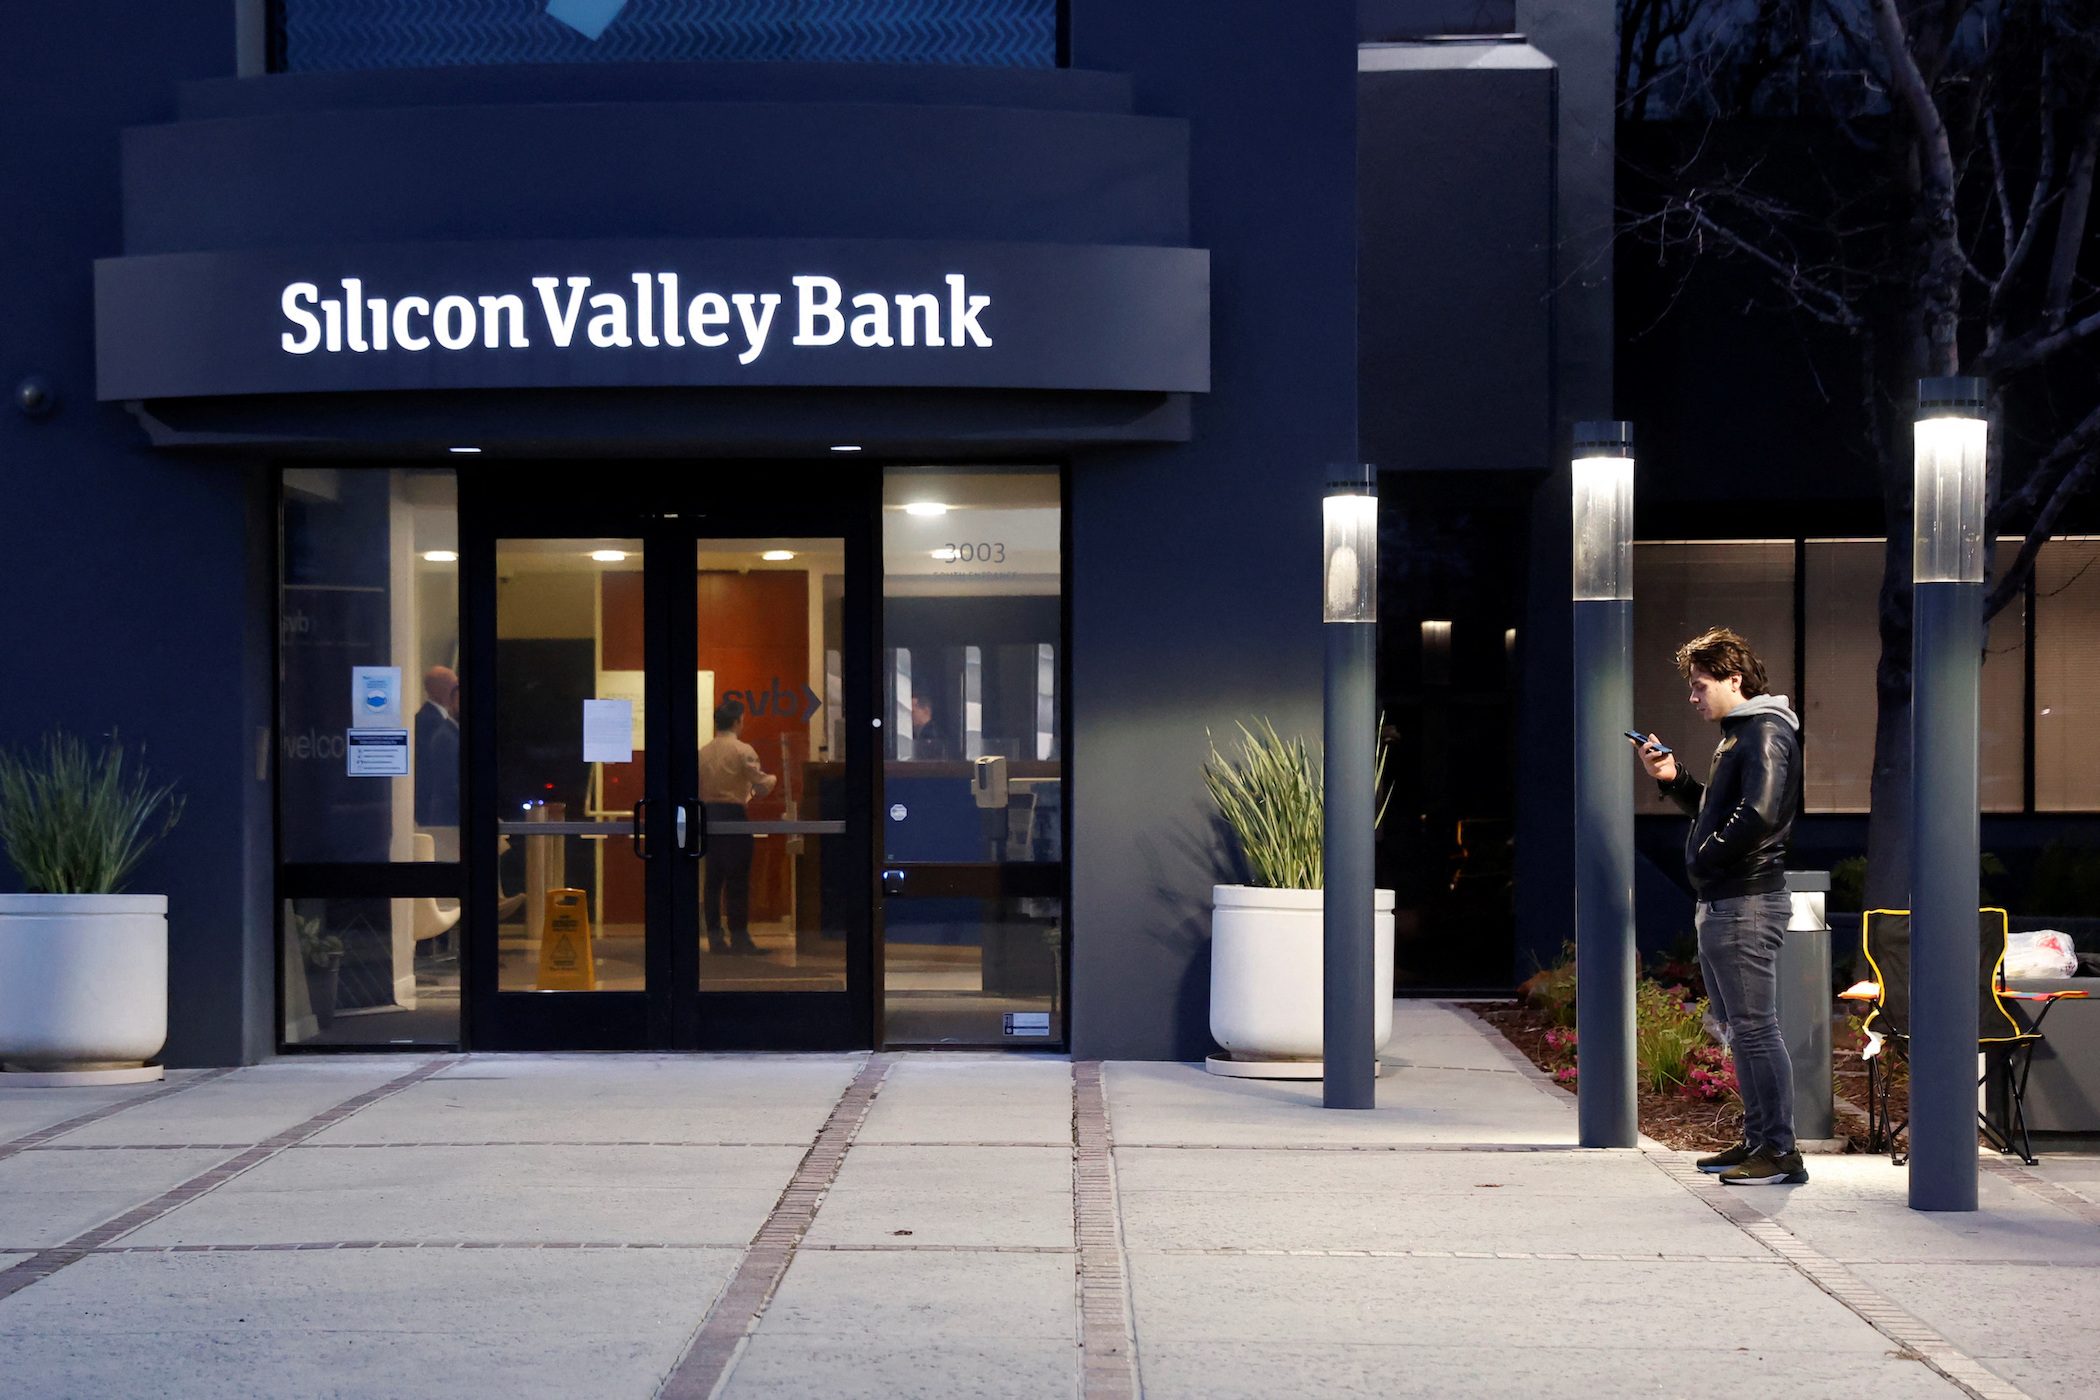 US Federal Reserve to review its oversight of Silicon Valley Bank